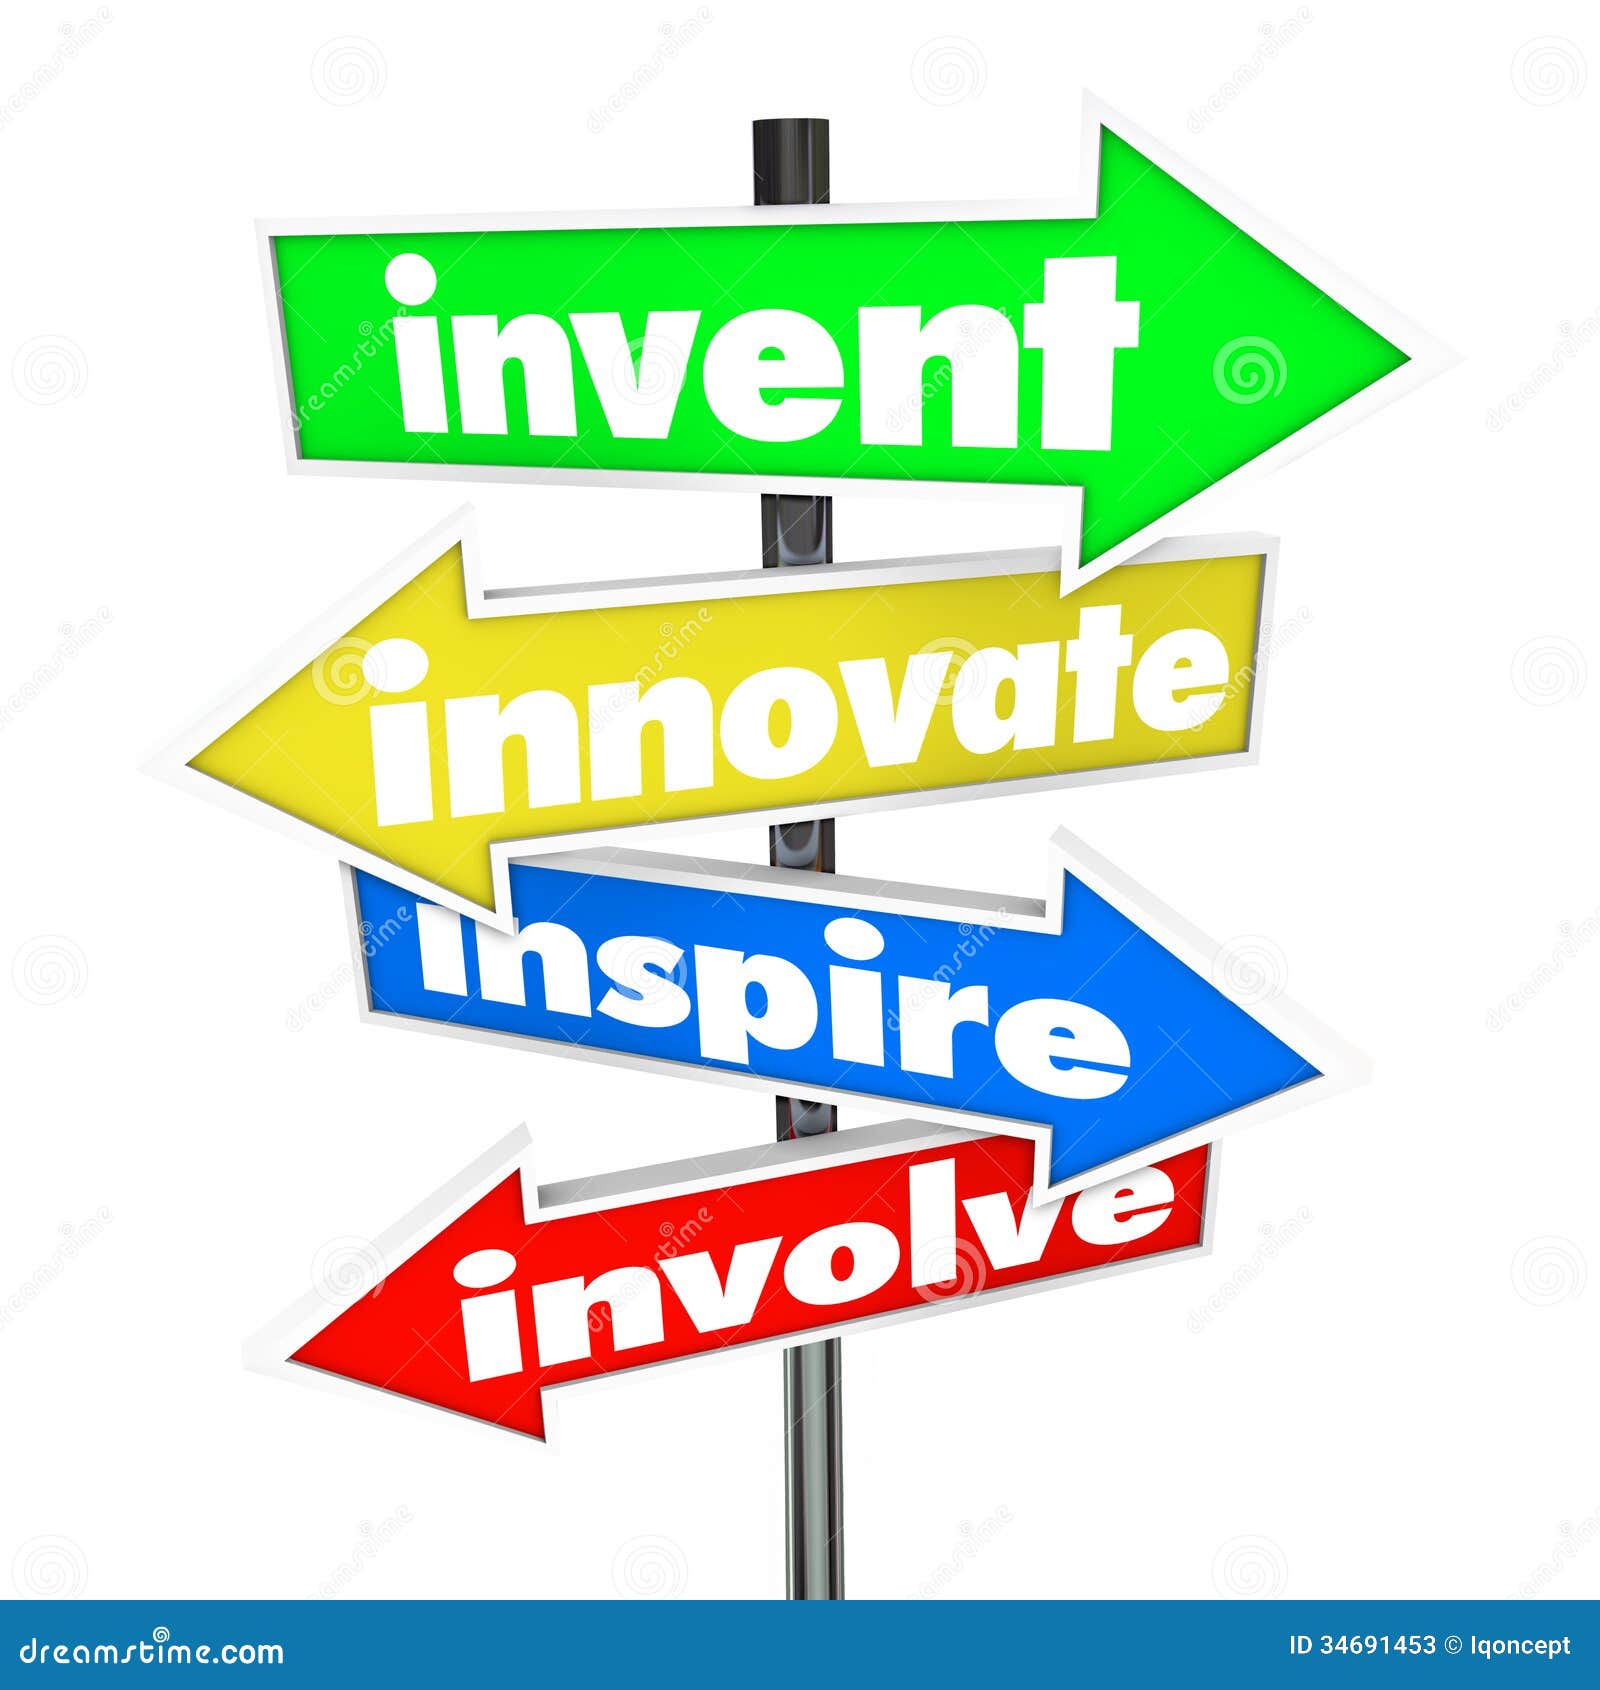 invent innovate inspire involve road arrow signs